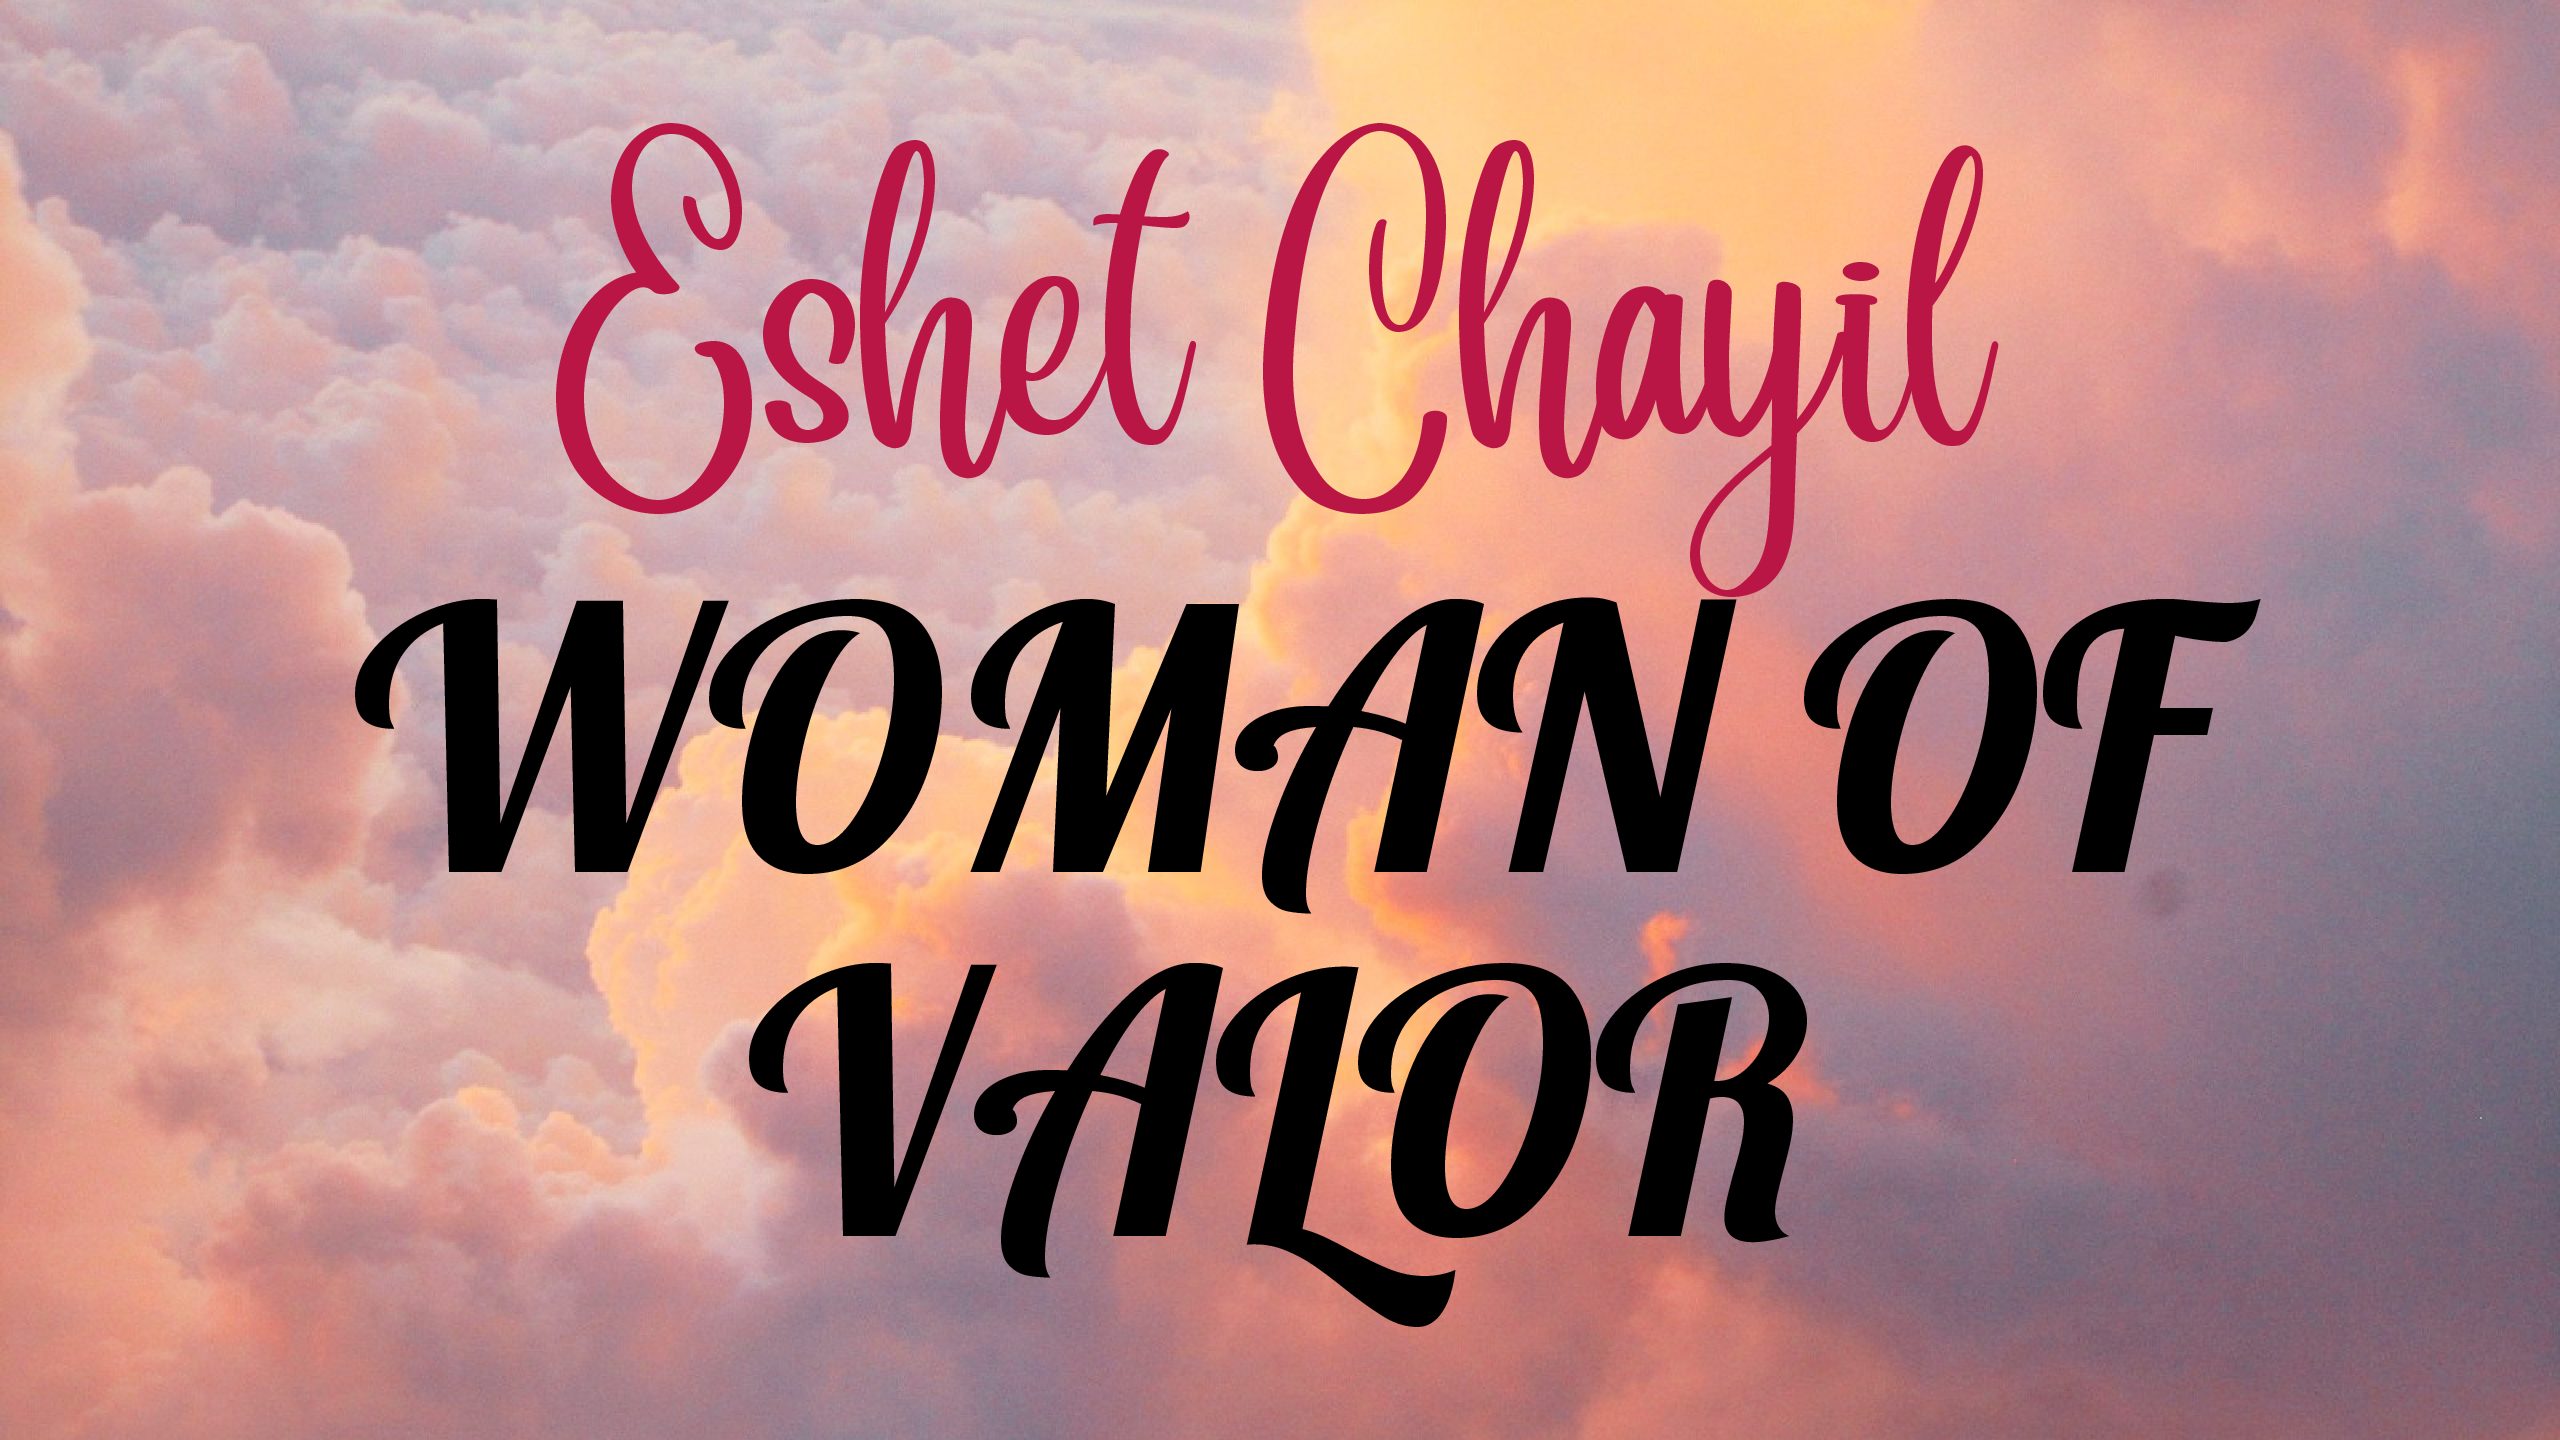 Proverbs 31 – Woman of Valor